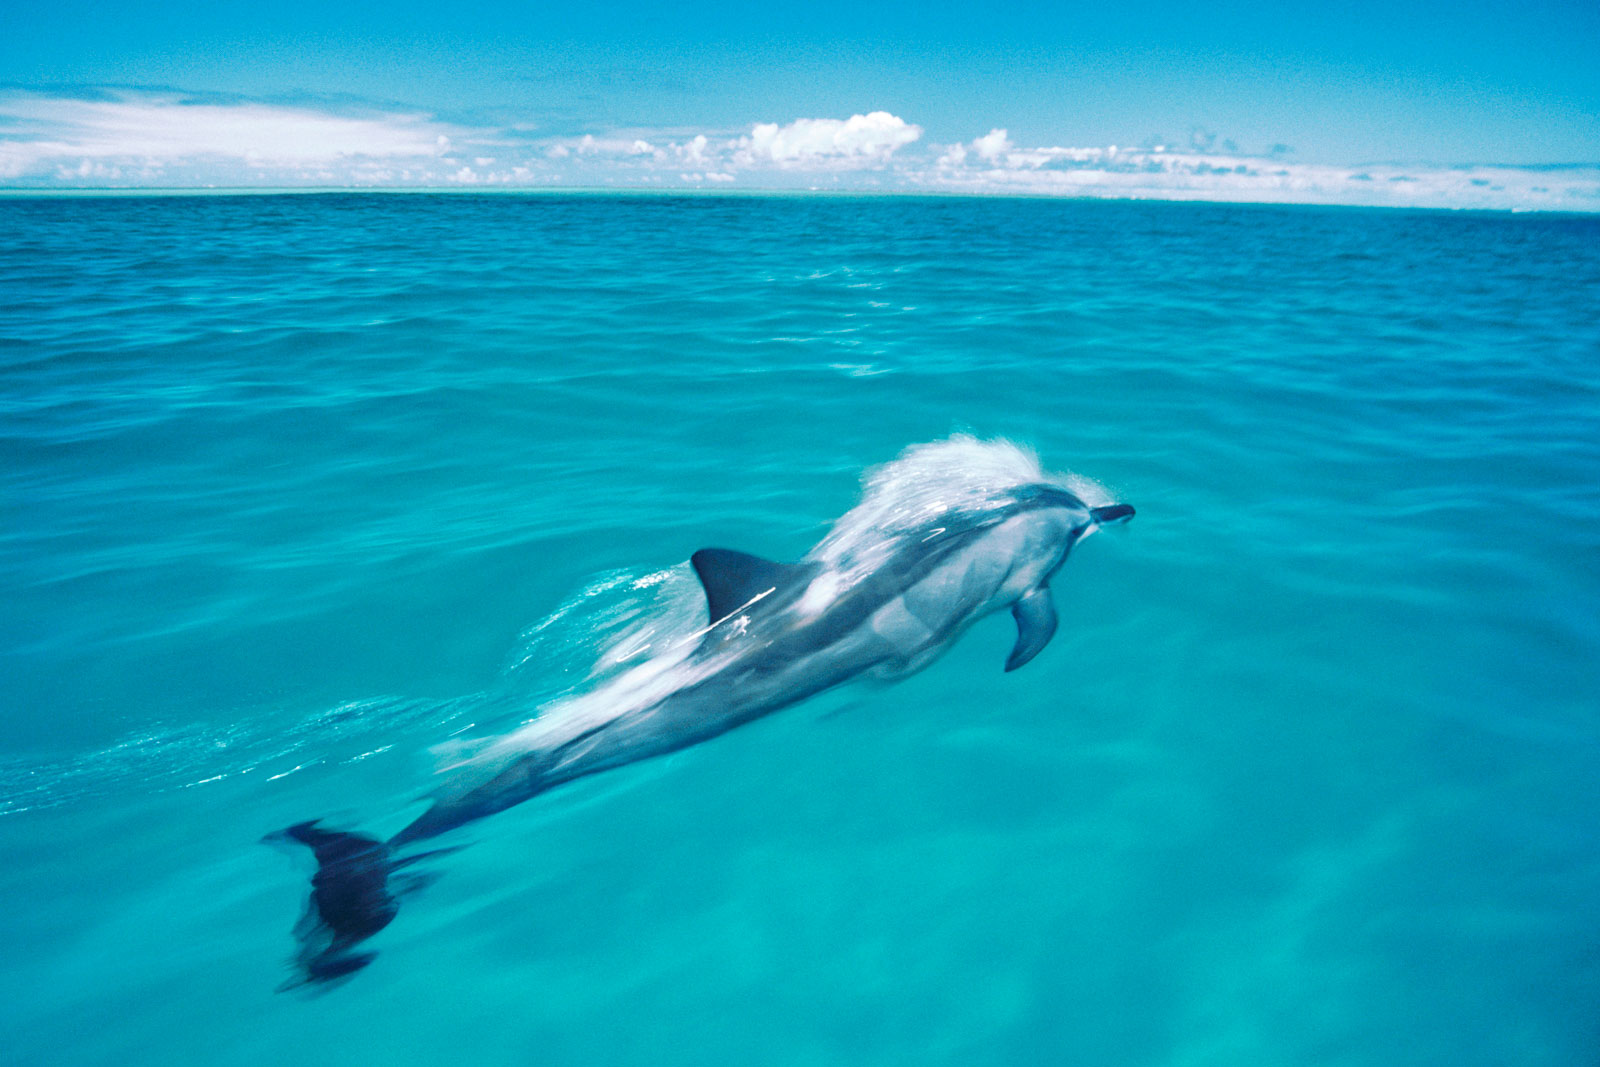 Spinner dolphin, Midway Atoll National Wildlife Refuge, Hawaii